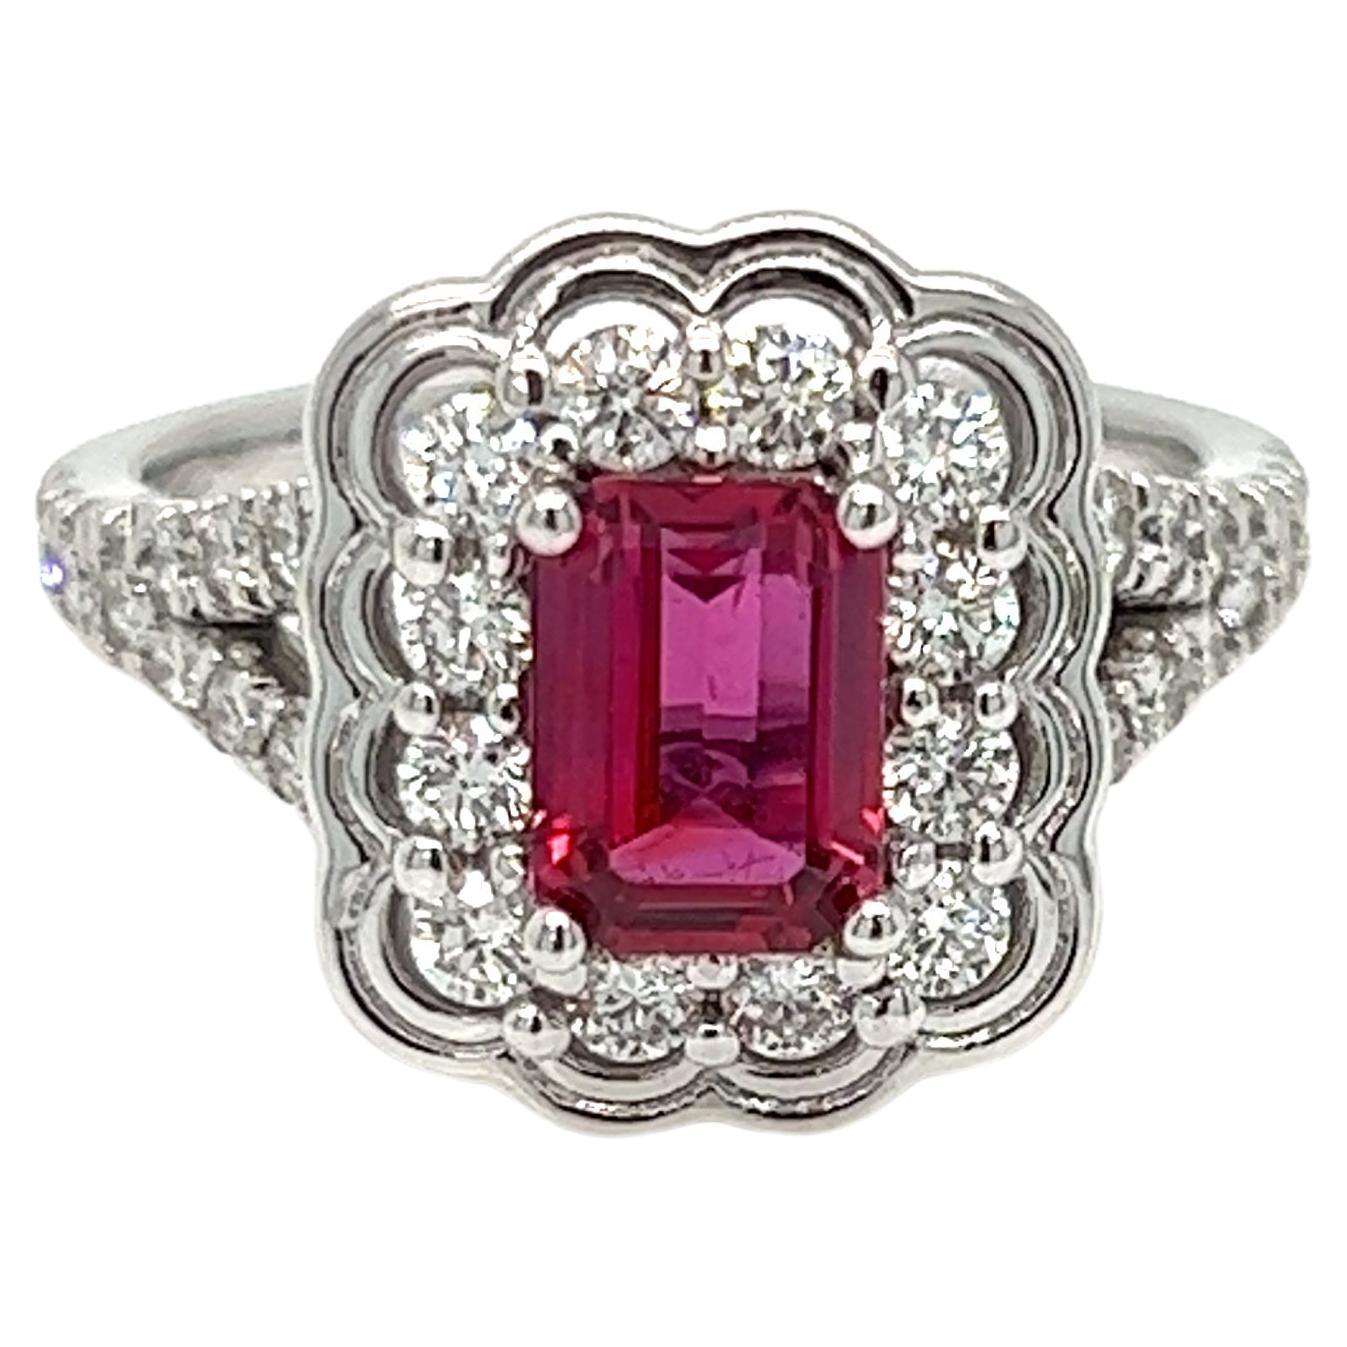 1.88 Carats Emerald Cut Ruby Diamond Halo Engagement Ring For Sale